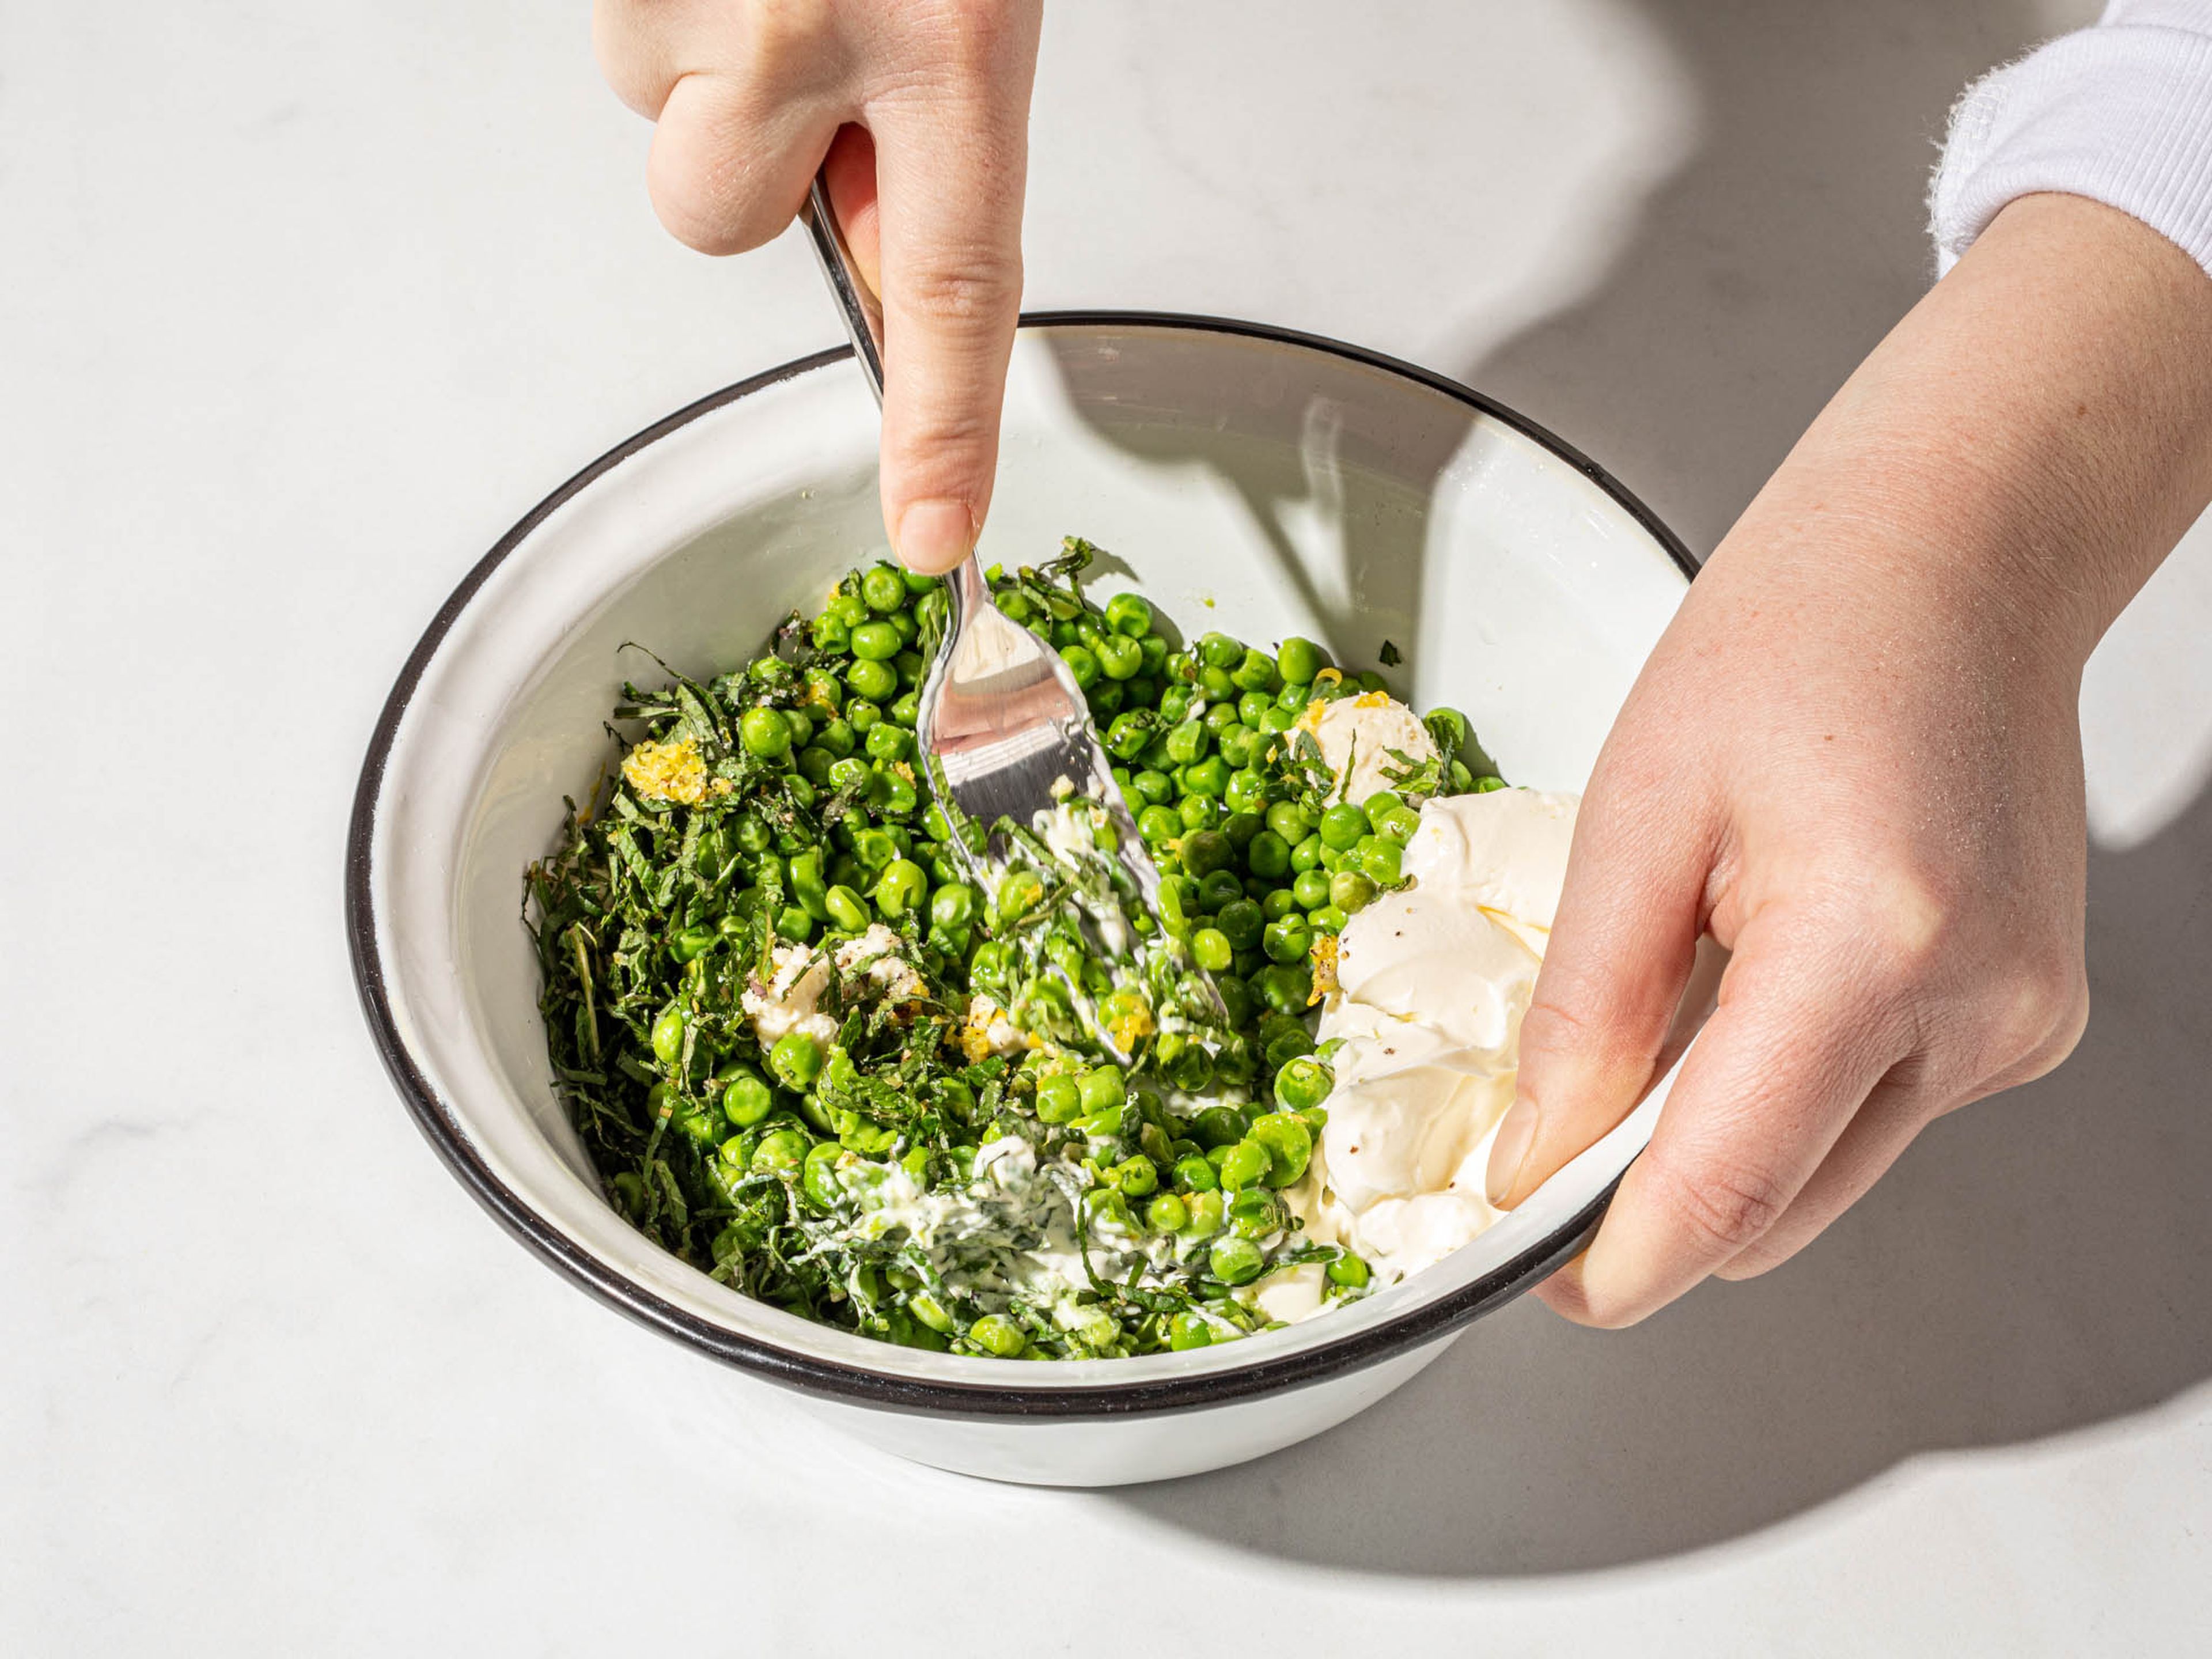 To a bowl add peas, some mint, crème fraîche, horseradish, zest and juice of half a lemon. Season with salt and pepper. Mash into a rough paste with a fork.